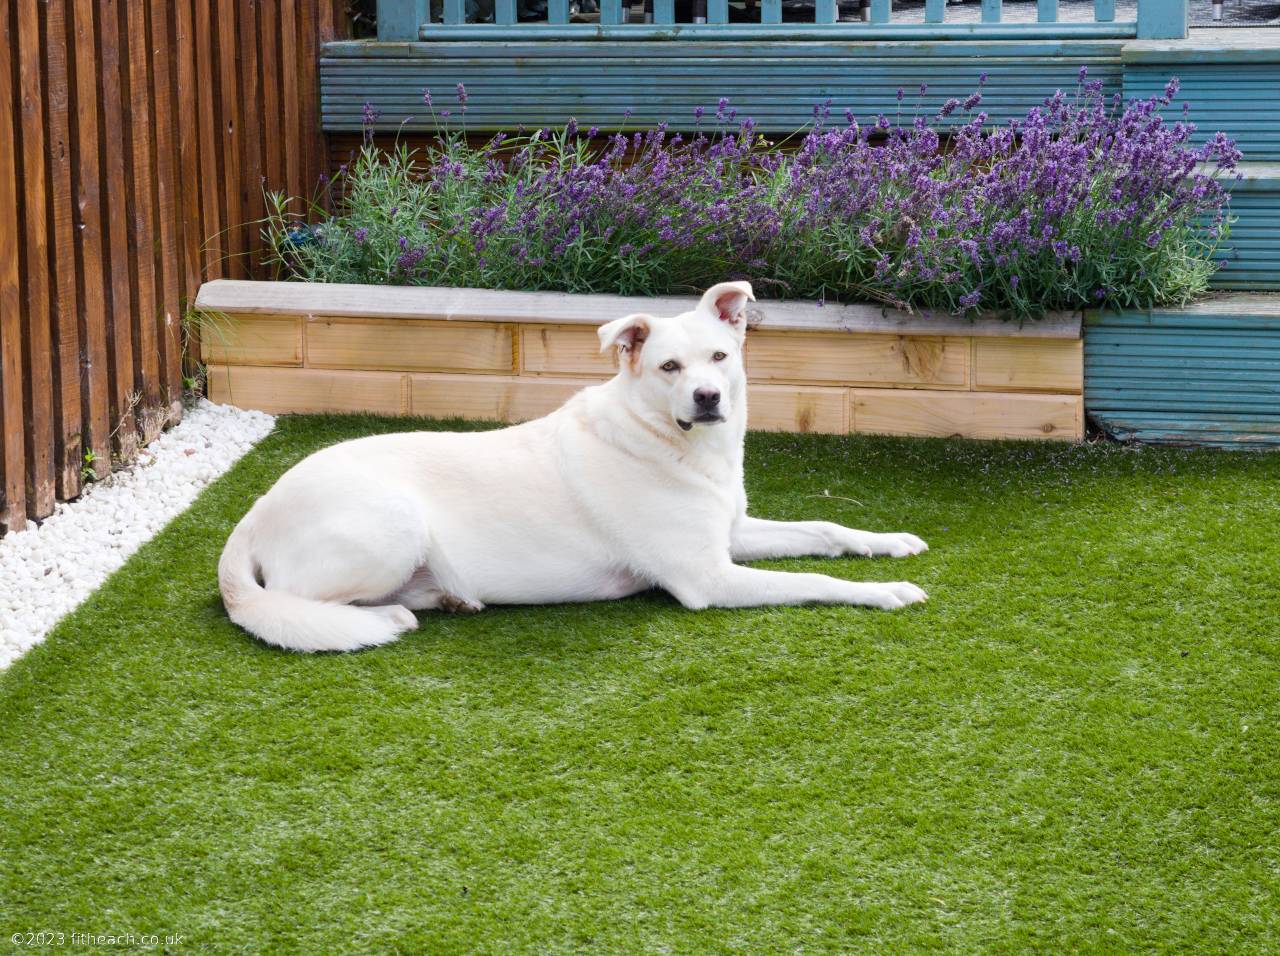 Gruoch, the white Akbash dog, lying in the garden, in a sphinx-like pose, with hear head towards the camera